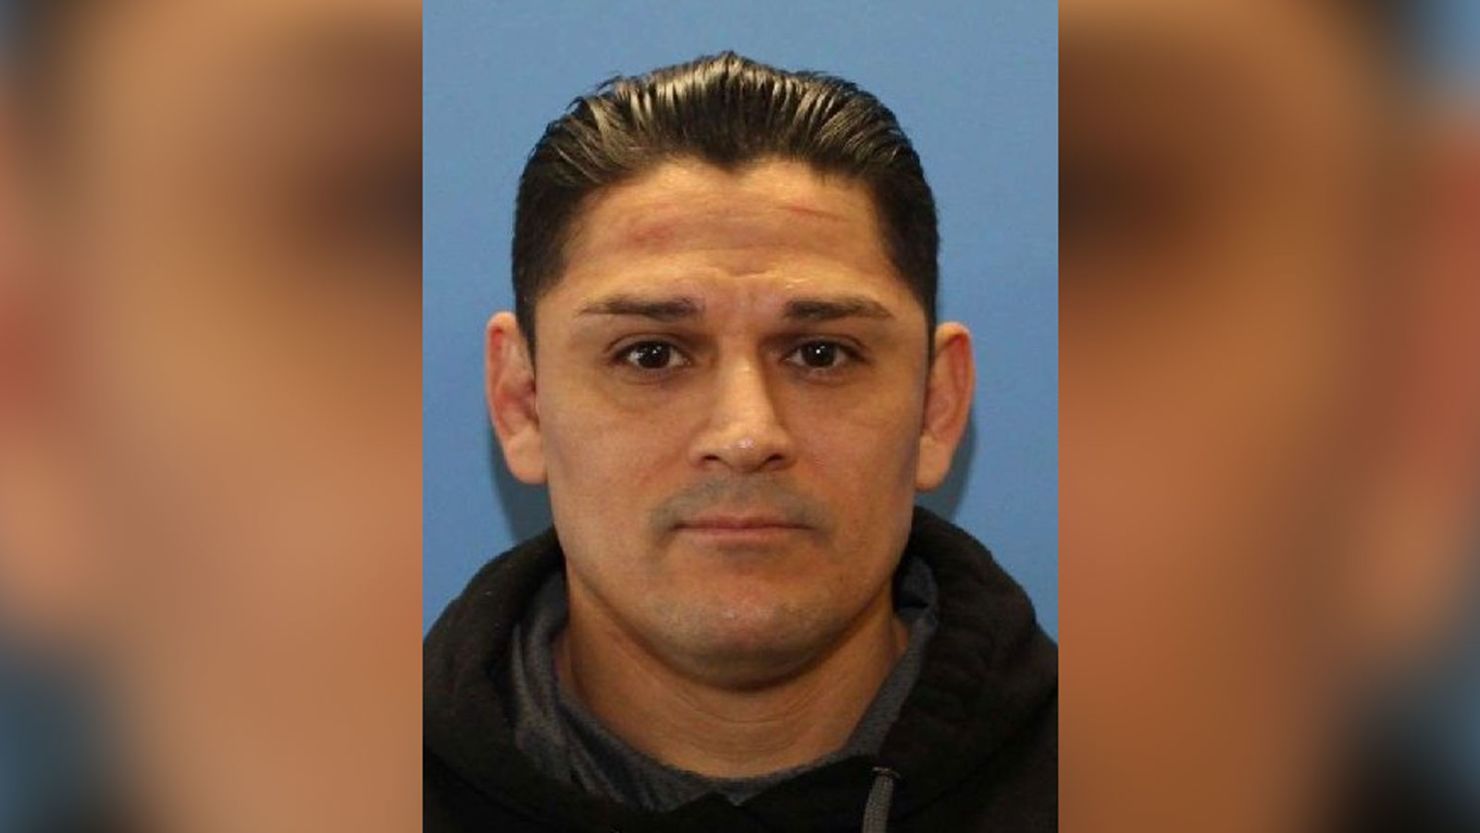 Elias Huizar died of a self-inflicted gunshot wound Tuesday after a chase by police in Oregon, authorities said.